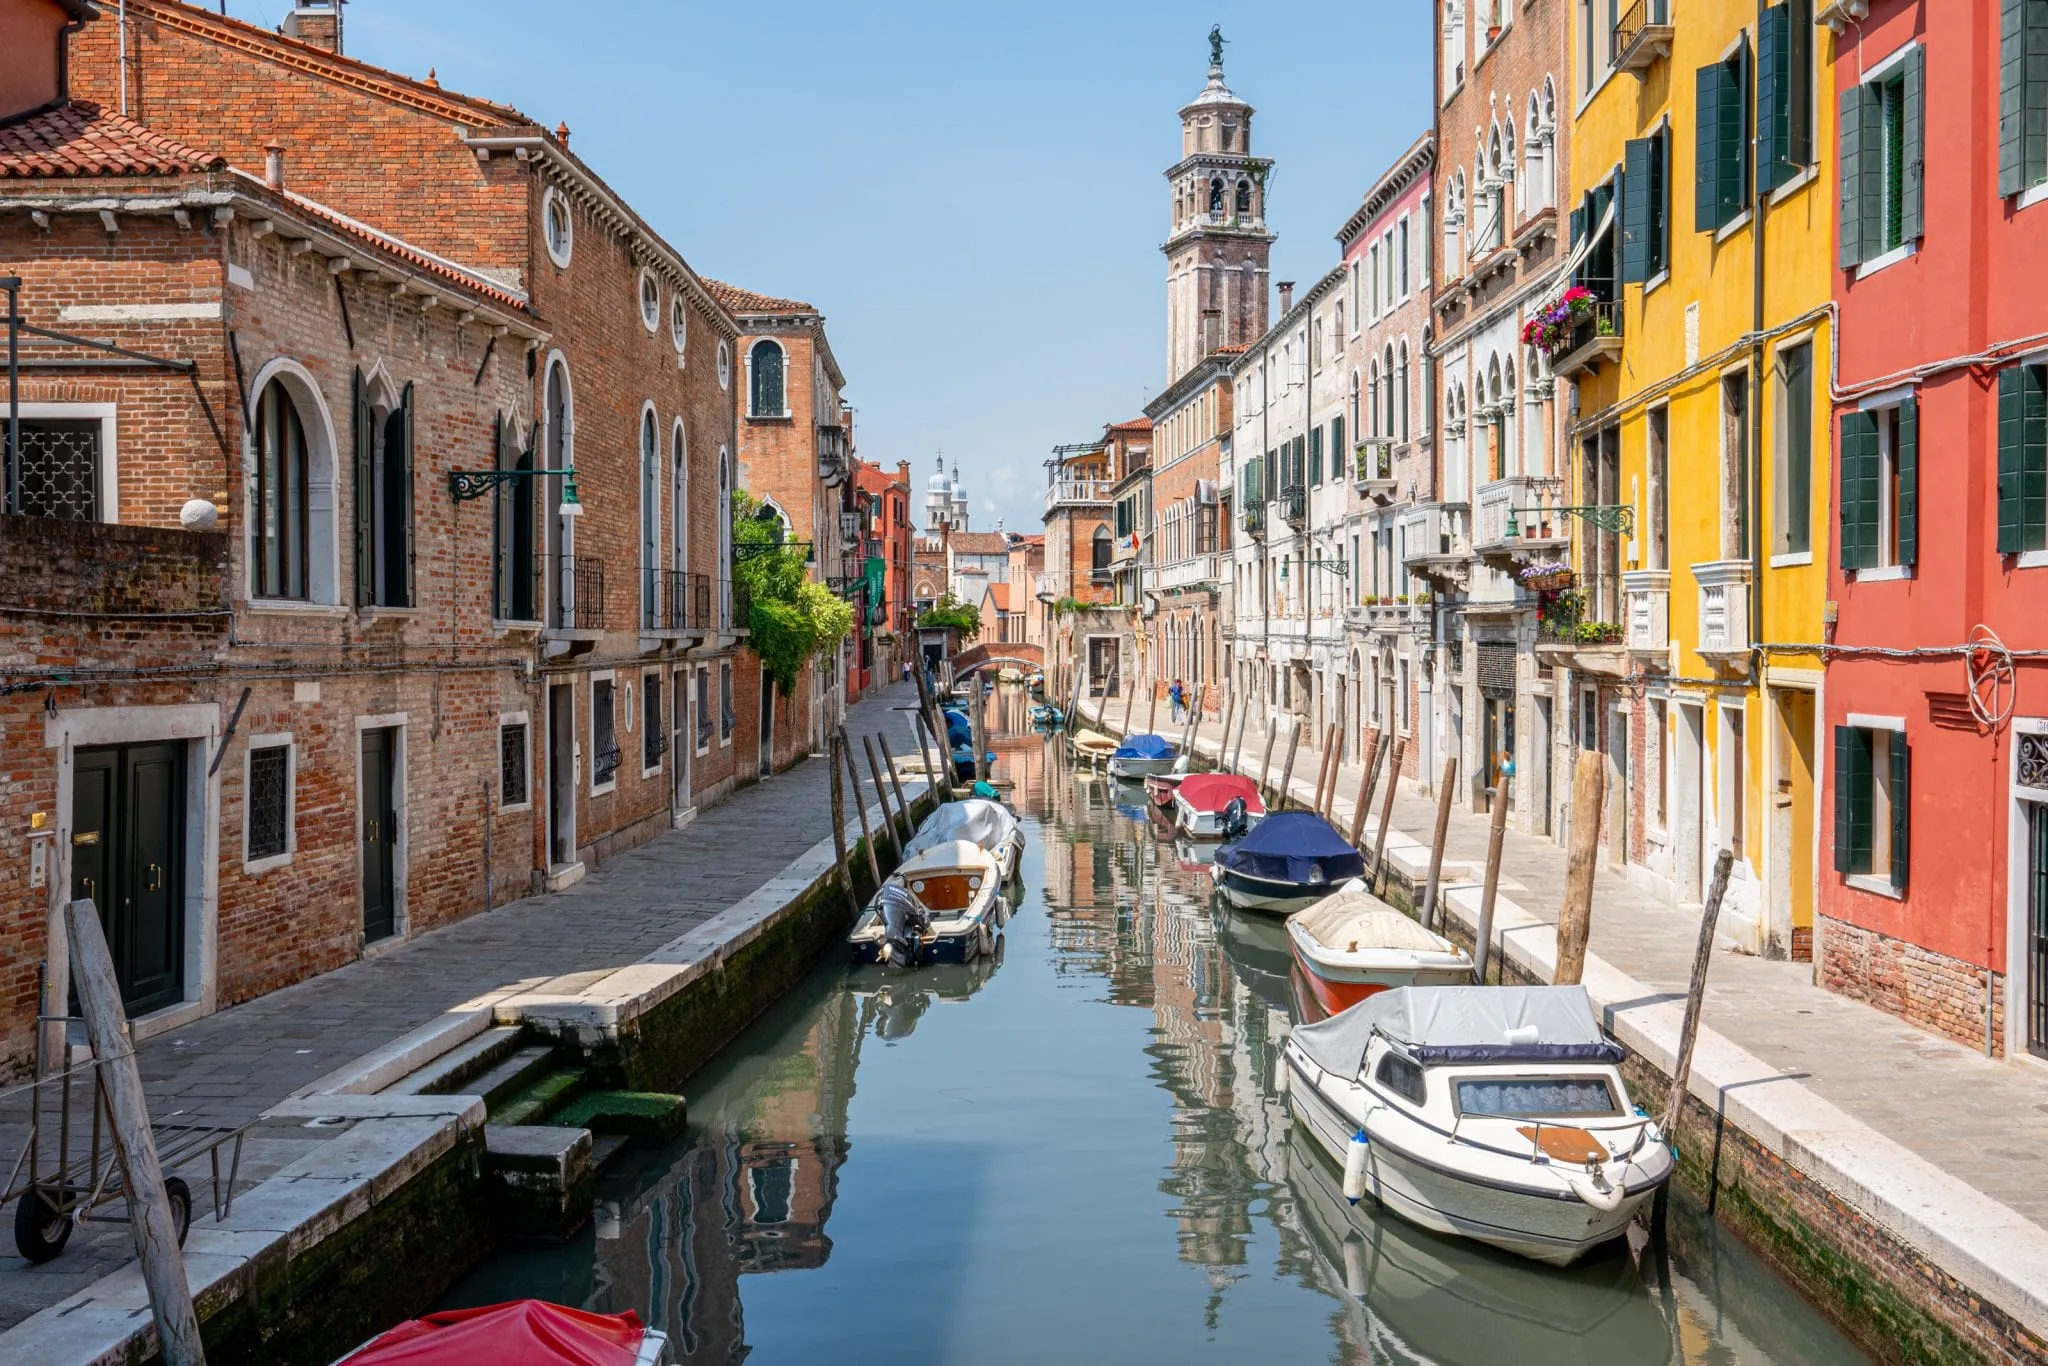 View of small canal in Dorsoduro Venice with colorful buildings to the right and motorboats parked in the canal. Quiet spots like this are common when seeking out Venice hidden gems